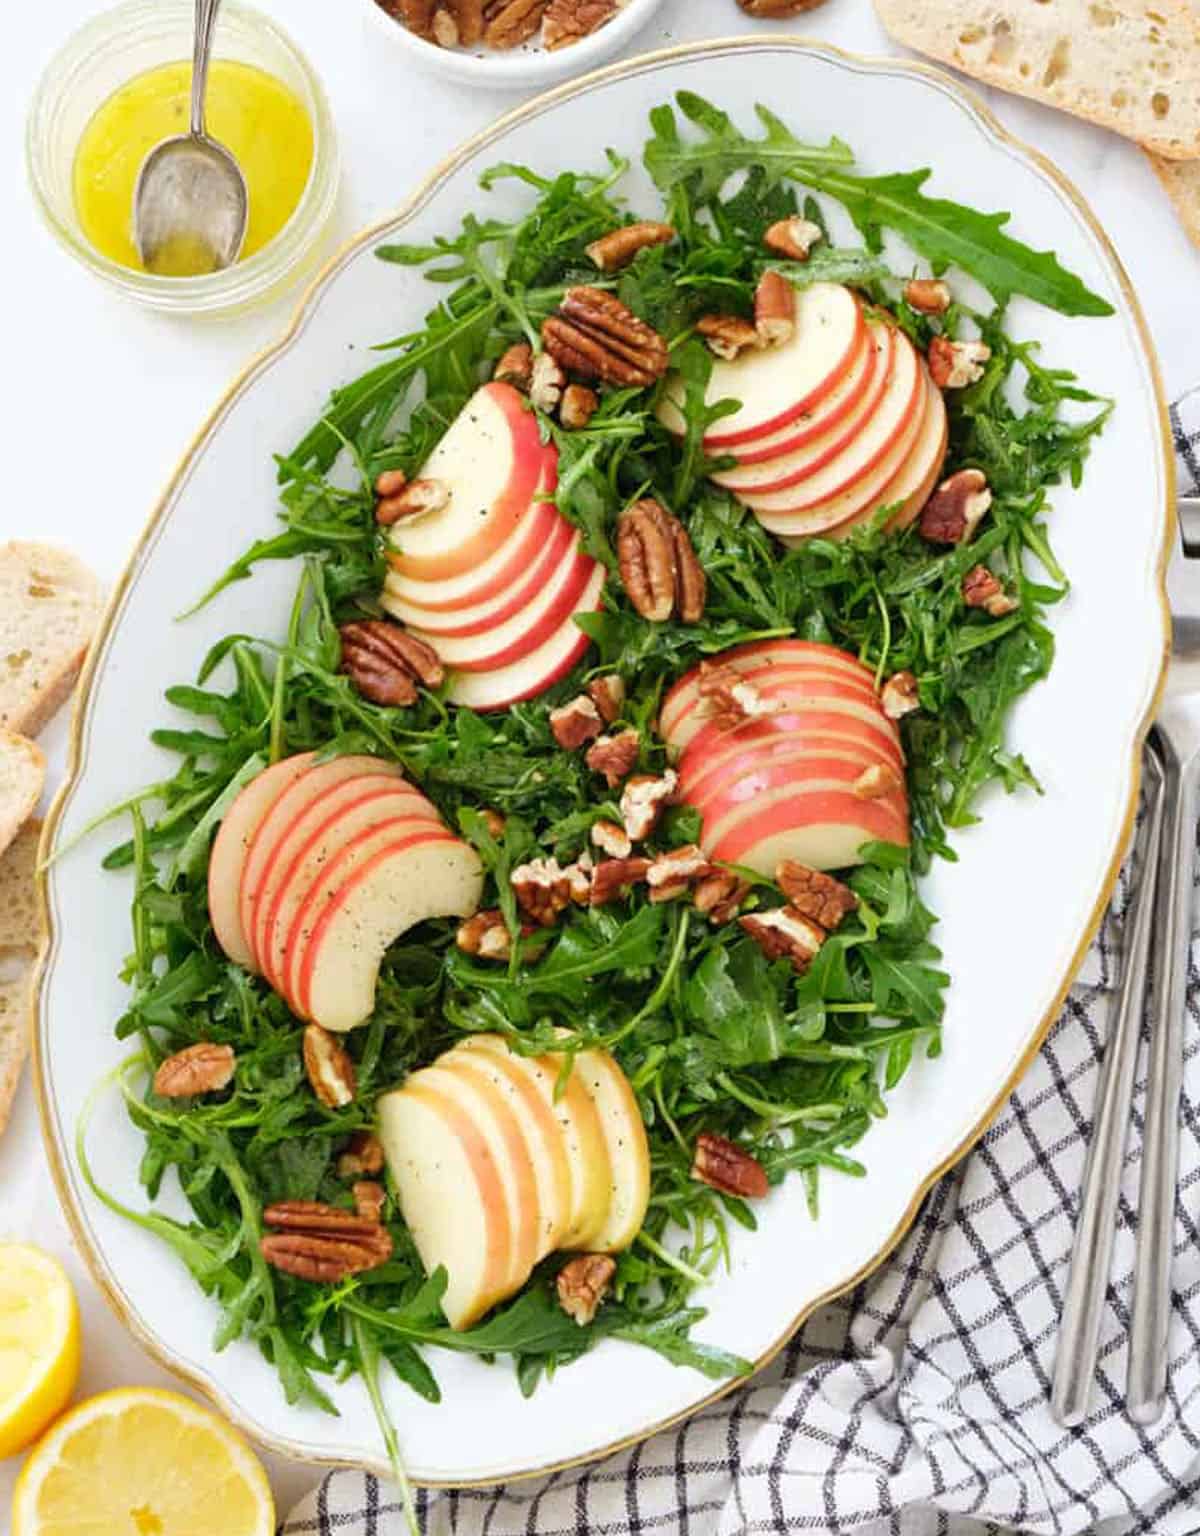 Top view of a large serving plate full of arugula apple salad.